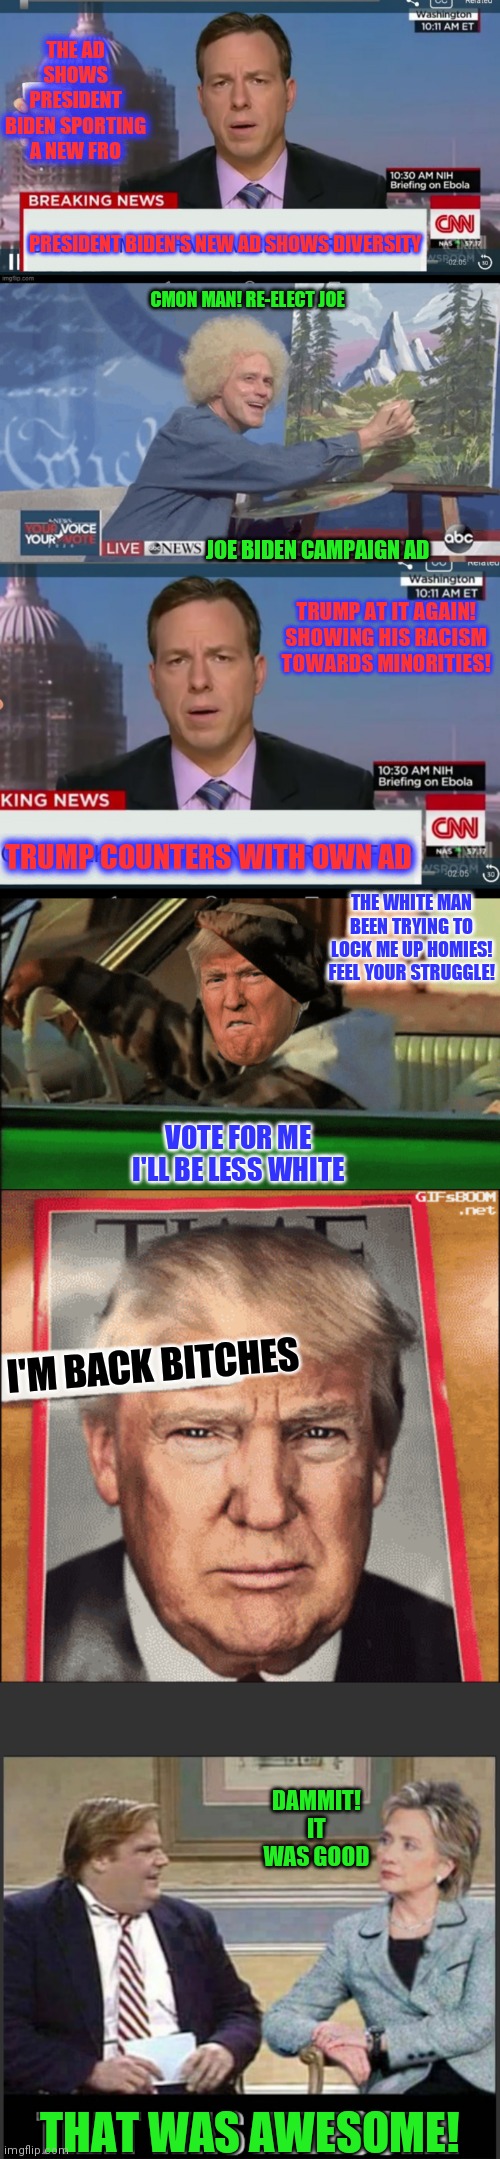 Trump vs biden 2024 | THE AD SHOWS PRESIDENT BIDEN SPORTING A NEW FRO; PRESIDENT BIDEN'S NEW AD SHOWS DIVERSITY; CMON MAN! RE-ELECT JOE; JOE BIDEN CAMPAIGN AD; TRUMP AT IT AGAIN!
SHOWING HIS RACISM TOWARDS MINORITIES! TRUMP COUNTERS WITH OWN AD; THE WHITE MAN BEEN TRYING TO LOCK ME UP HOMIES! FEEL YOUR STRUGGLE! VOTE FOR ME
I'LL BE LESS WHITE; I'M BACK BITCHES; DAMMIT!
IT WAS GOOD; THAT WAS AWESOME! | image tagged in campaign,politics | made w/ Imgflip meme maker